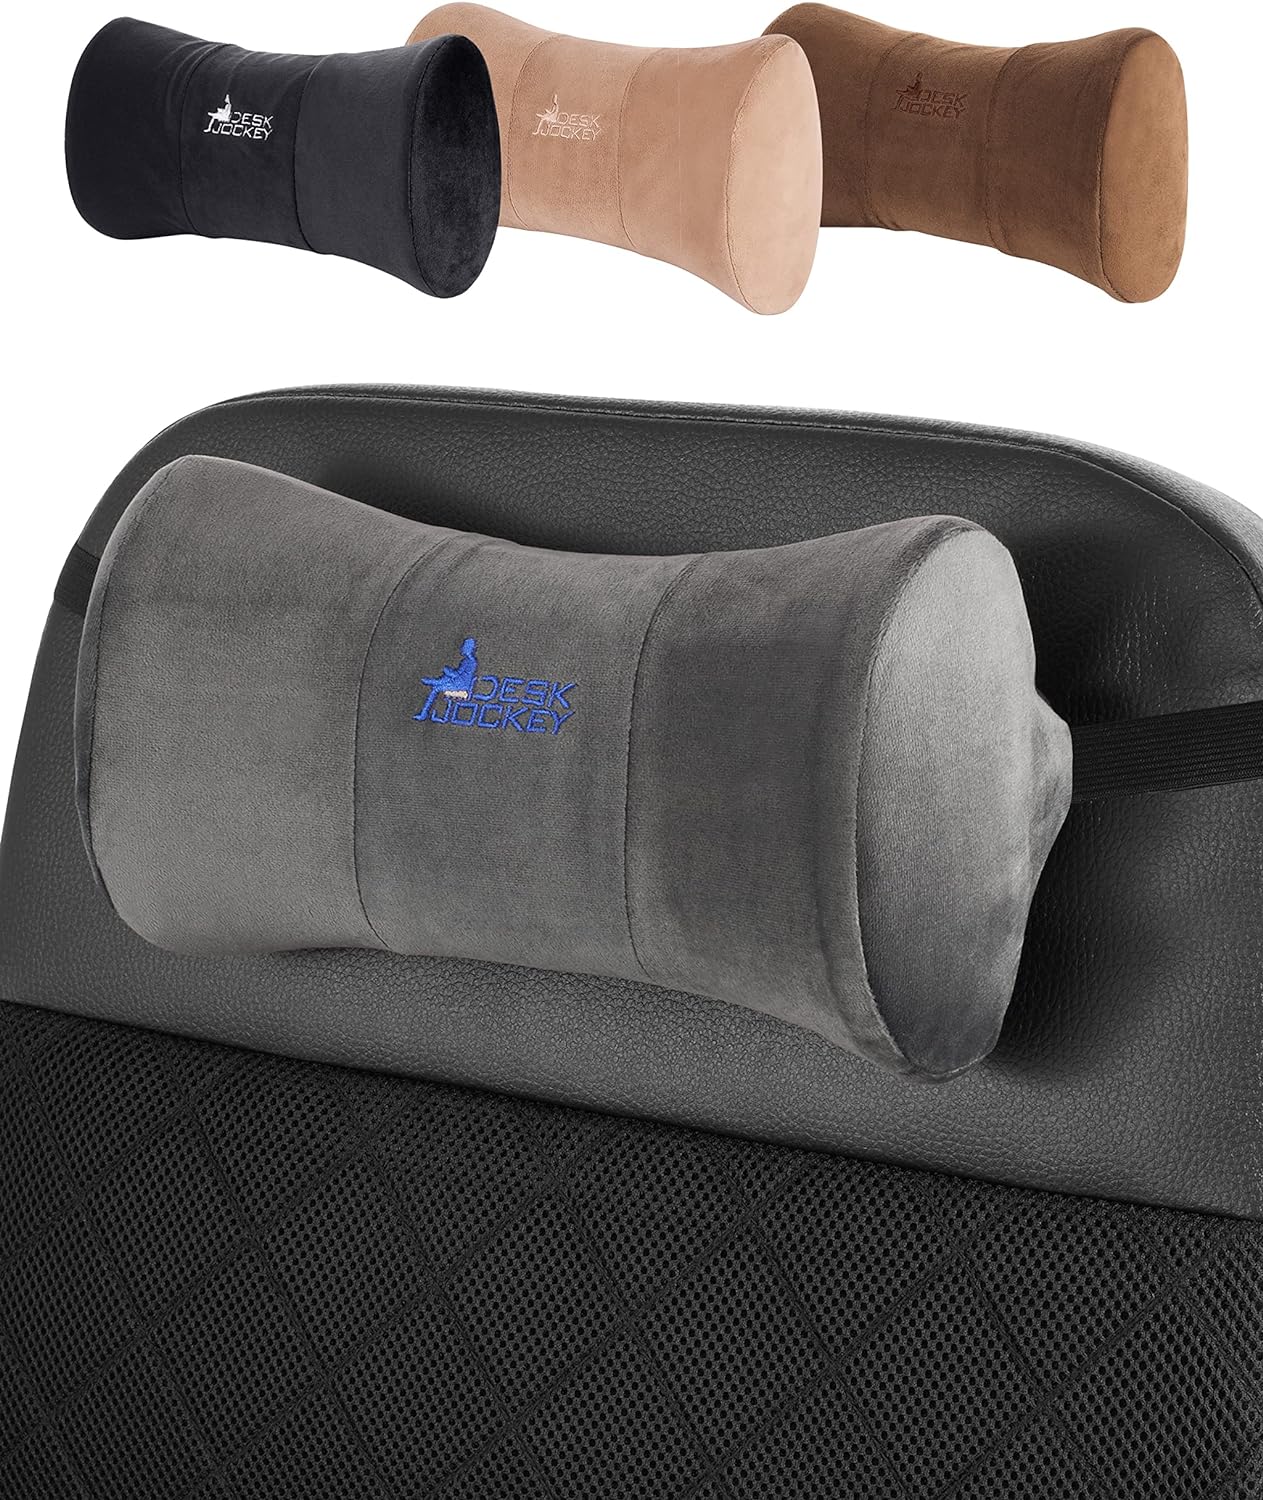 Neck Pillow Headrest Support Cushion - Clinical Grade Memory Foam for Chairs, Recliners, Driving Bucket Seats